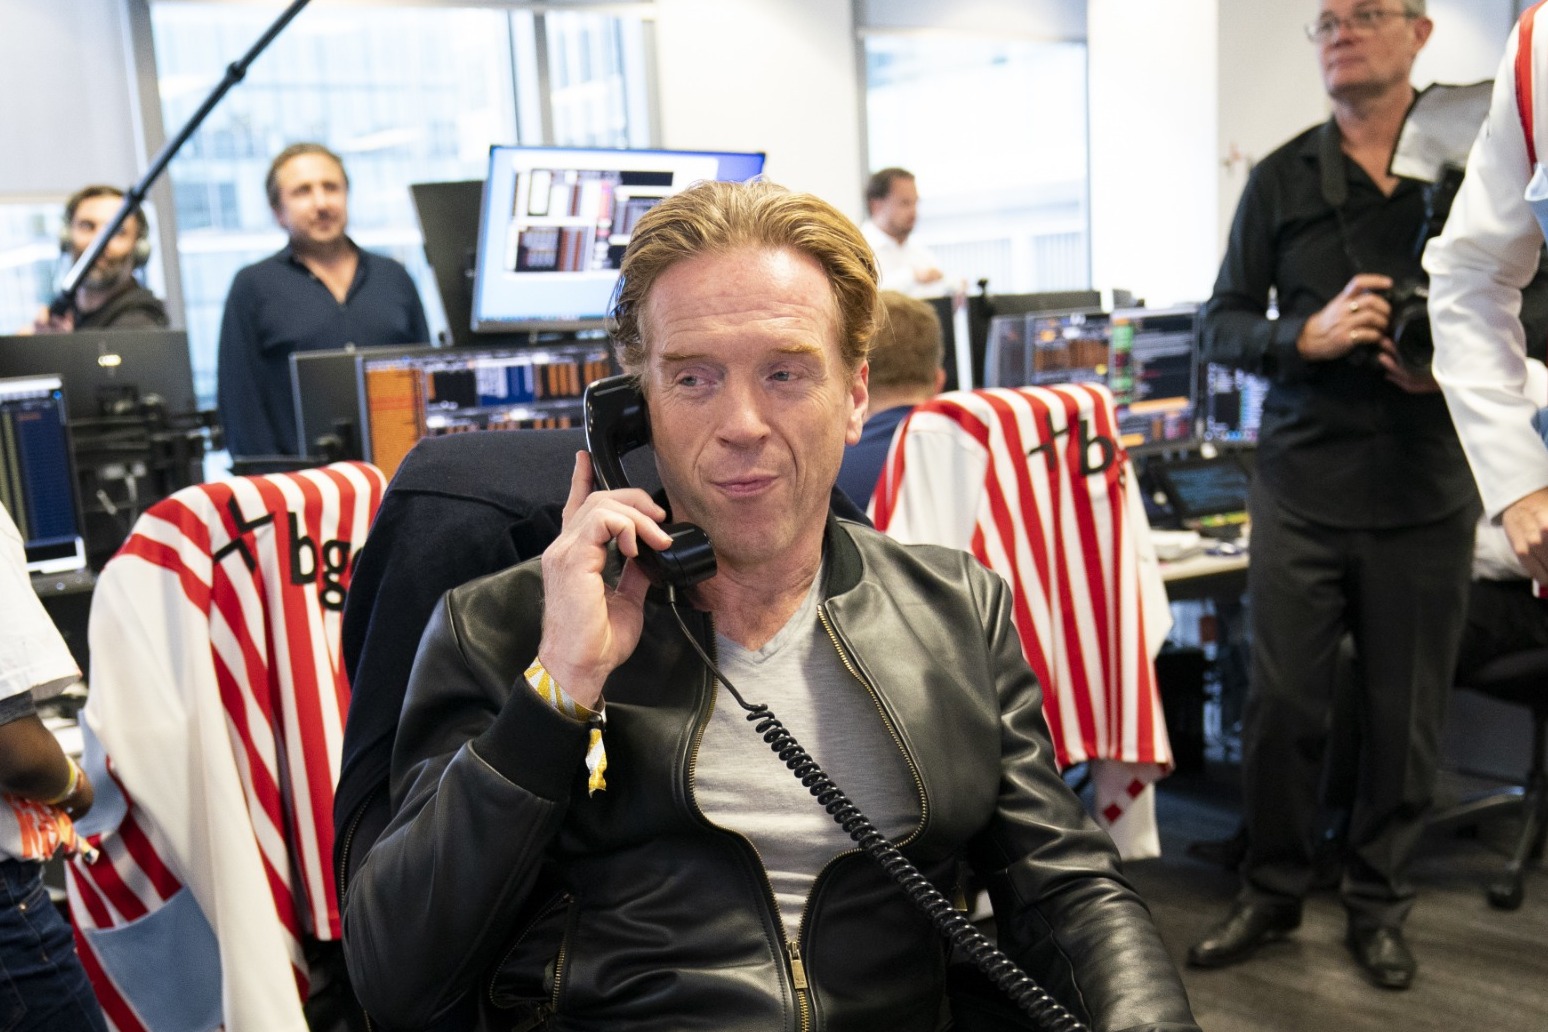 Actors Damian Lewis and William Roache set to receive royal honours 